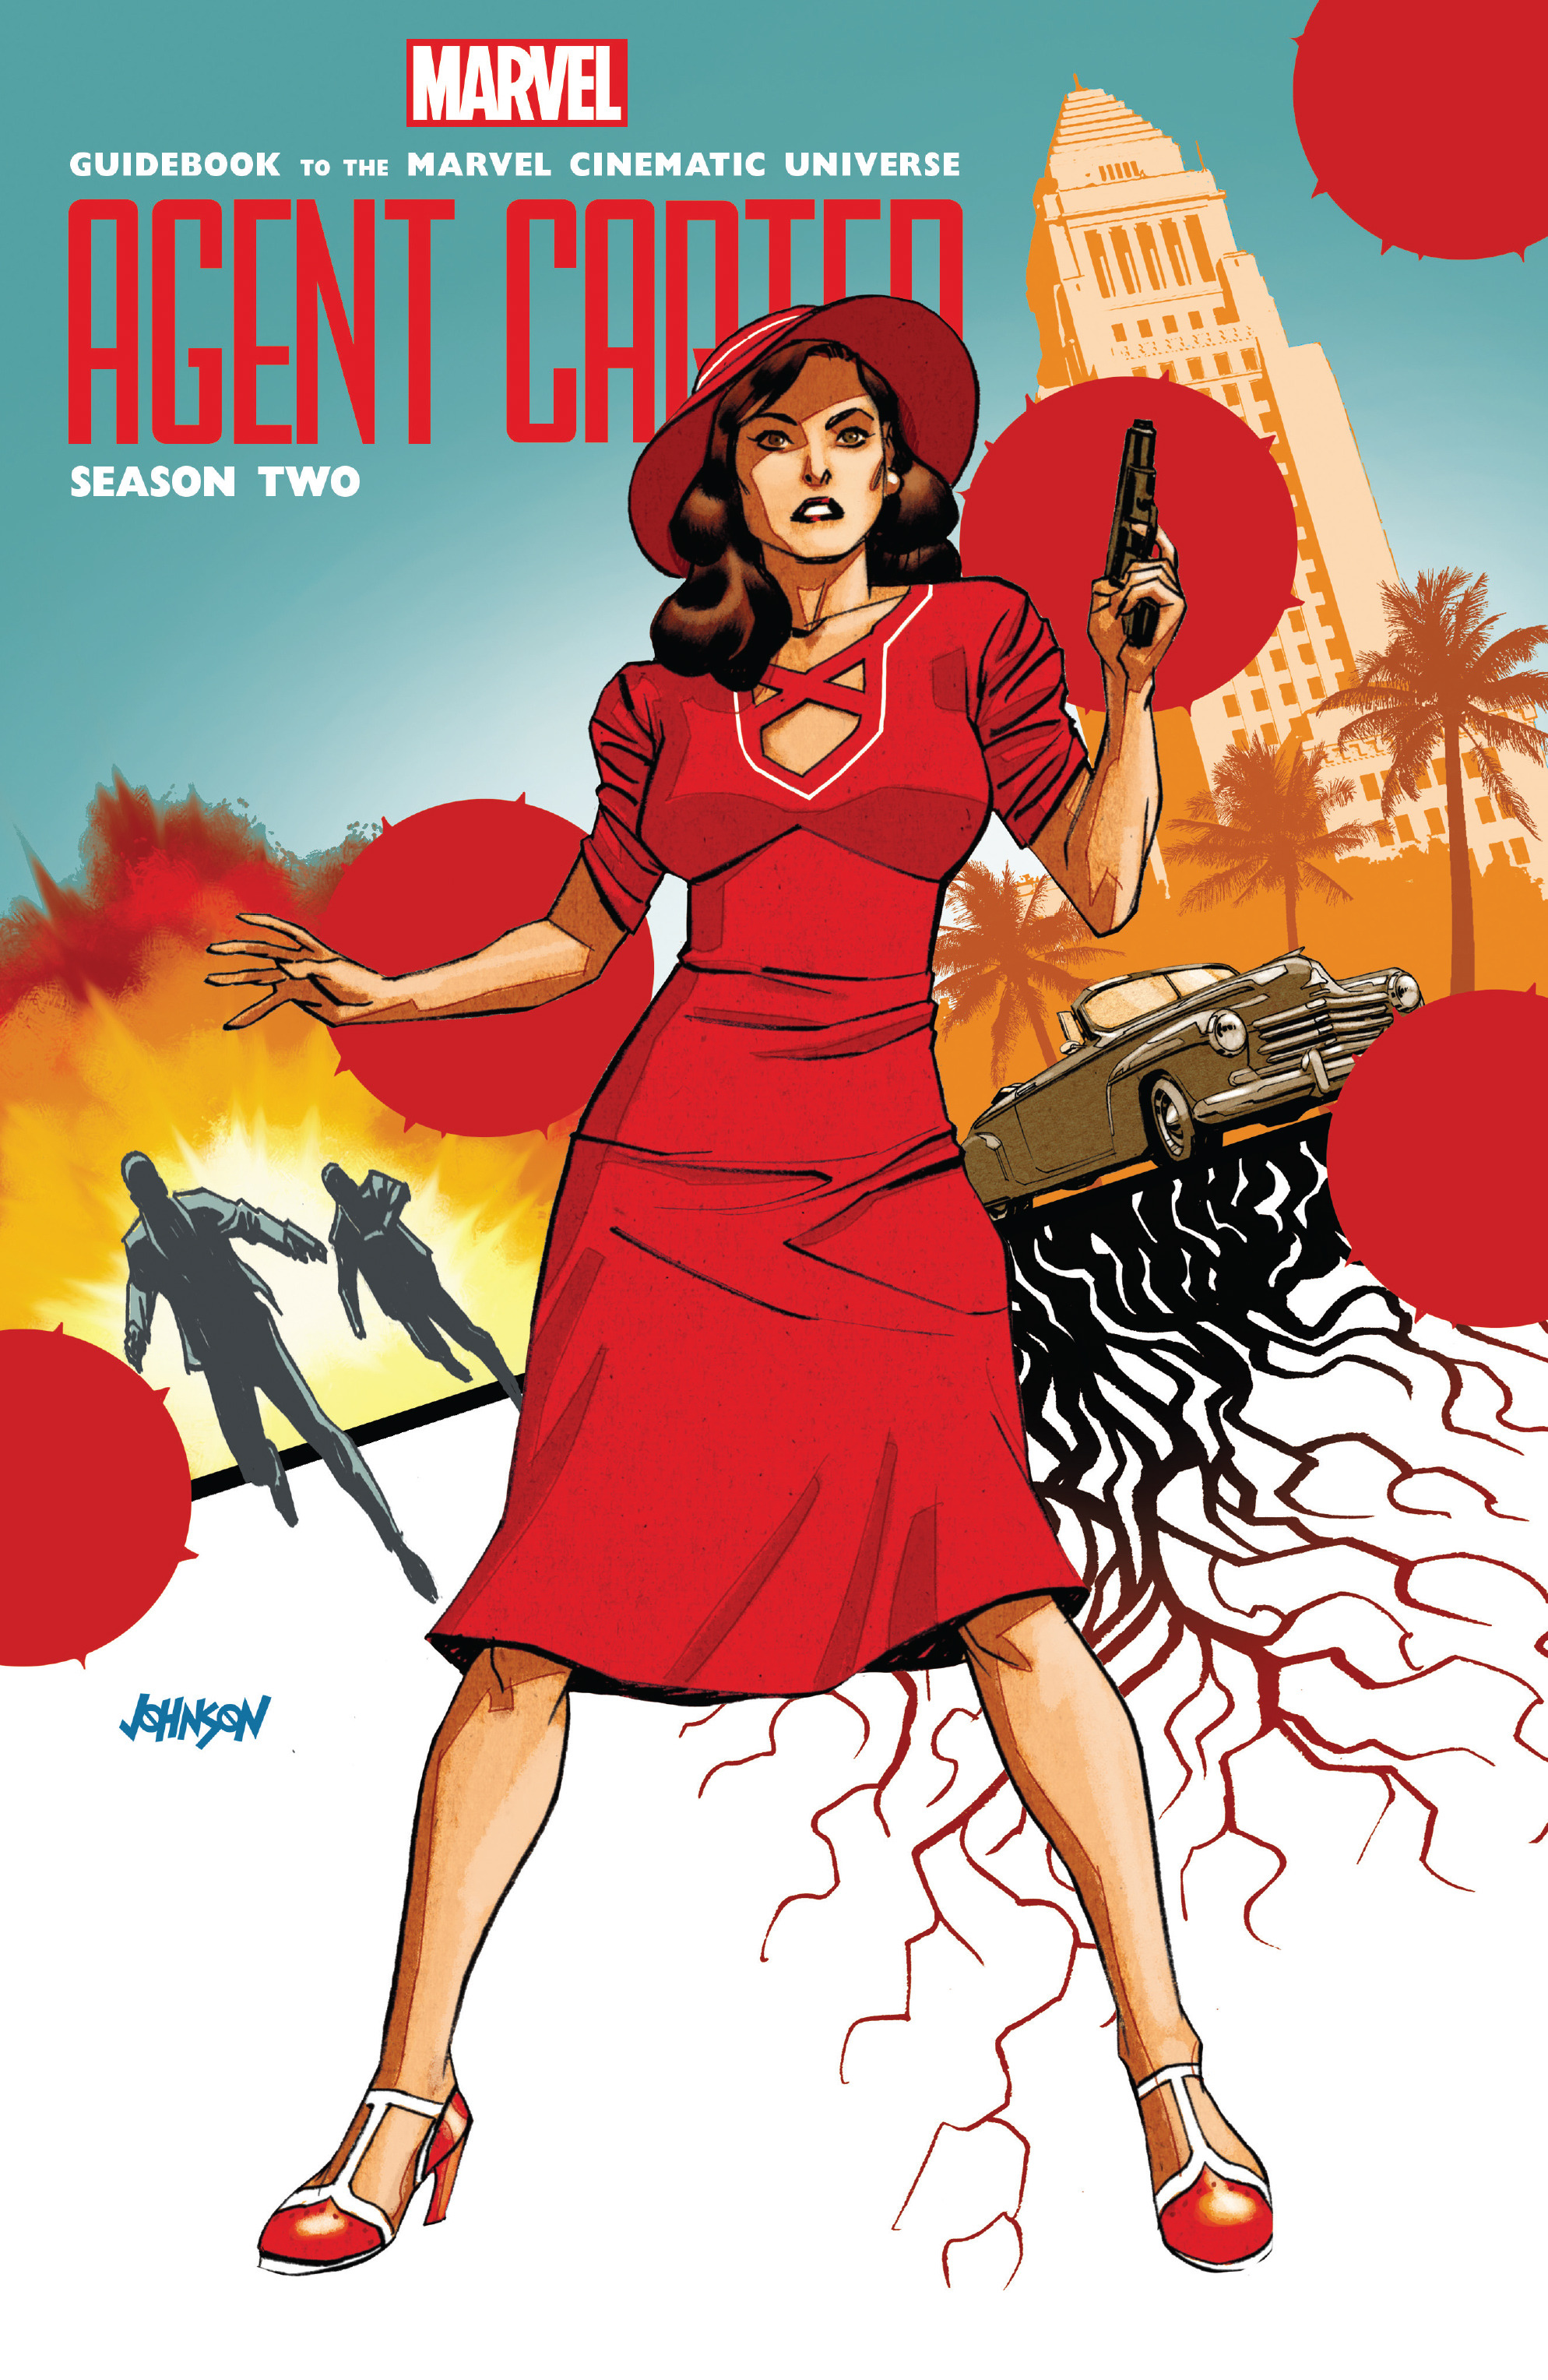 Read online Guidebook to the Marvel Cinematic Universe - Marvel's Agent Carter Season Two comic -  Issue # Full - 1